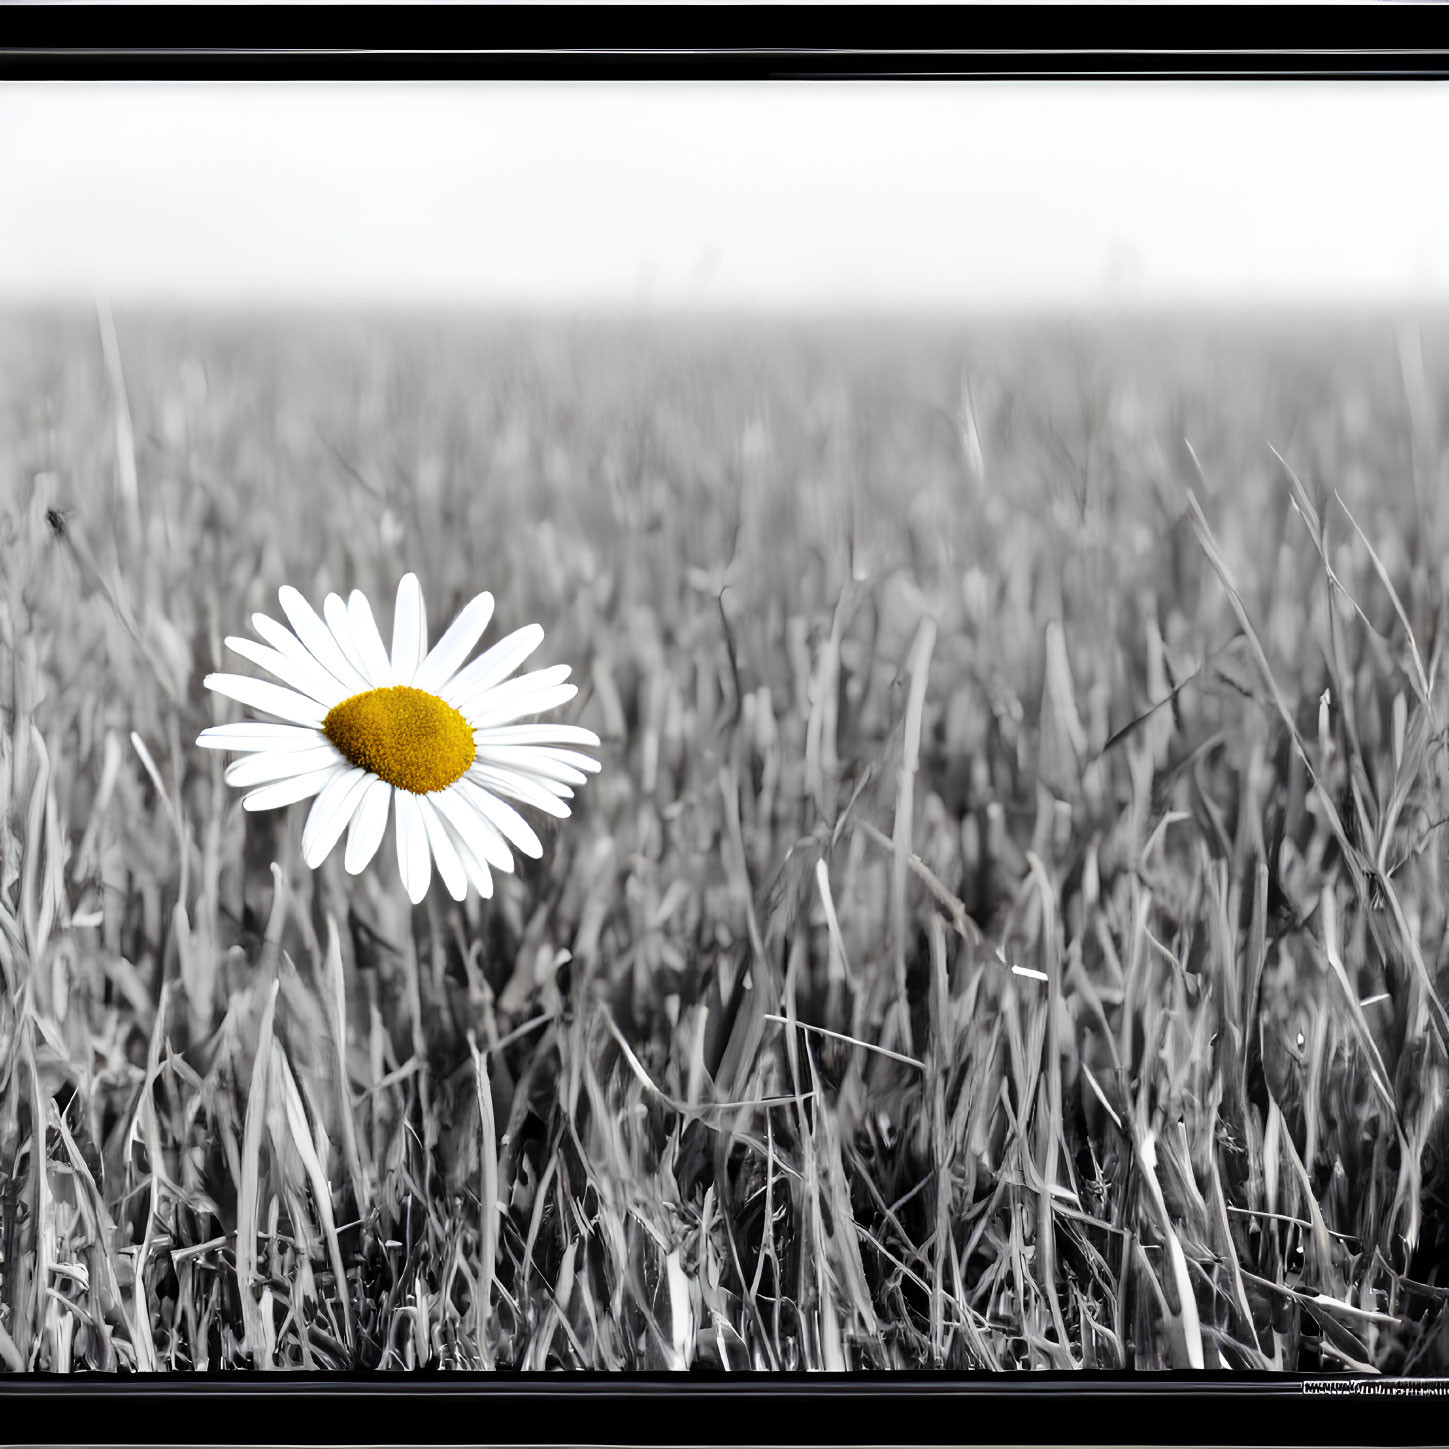 Vibrant daisy in monochromatic grass field with selective coloring